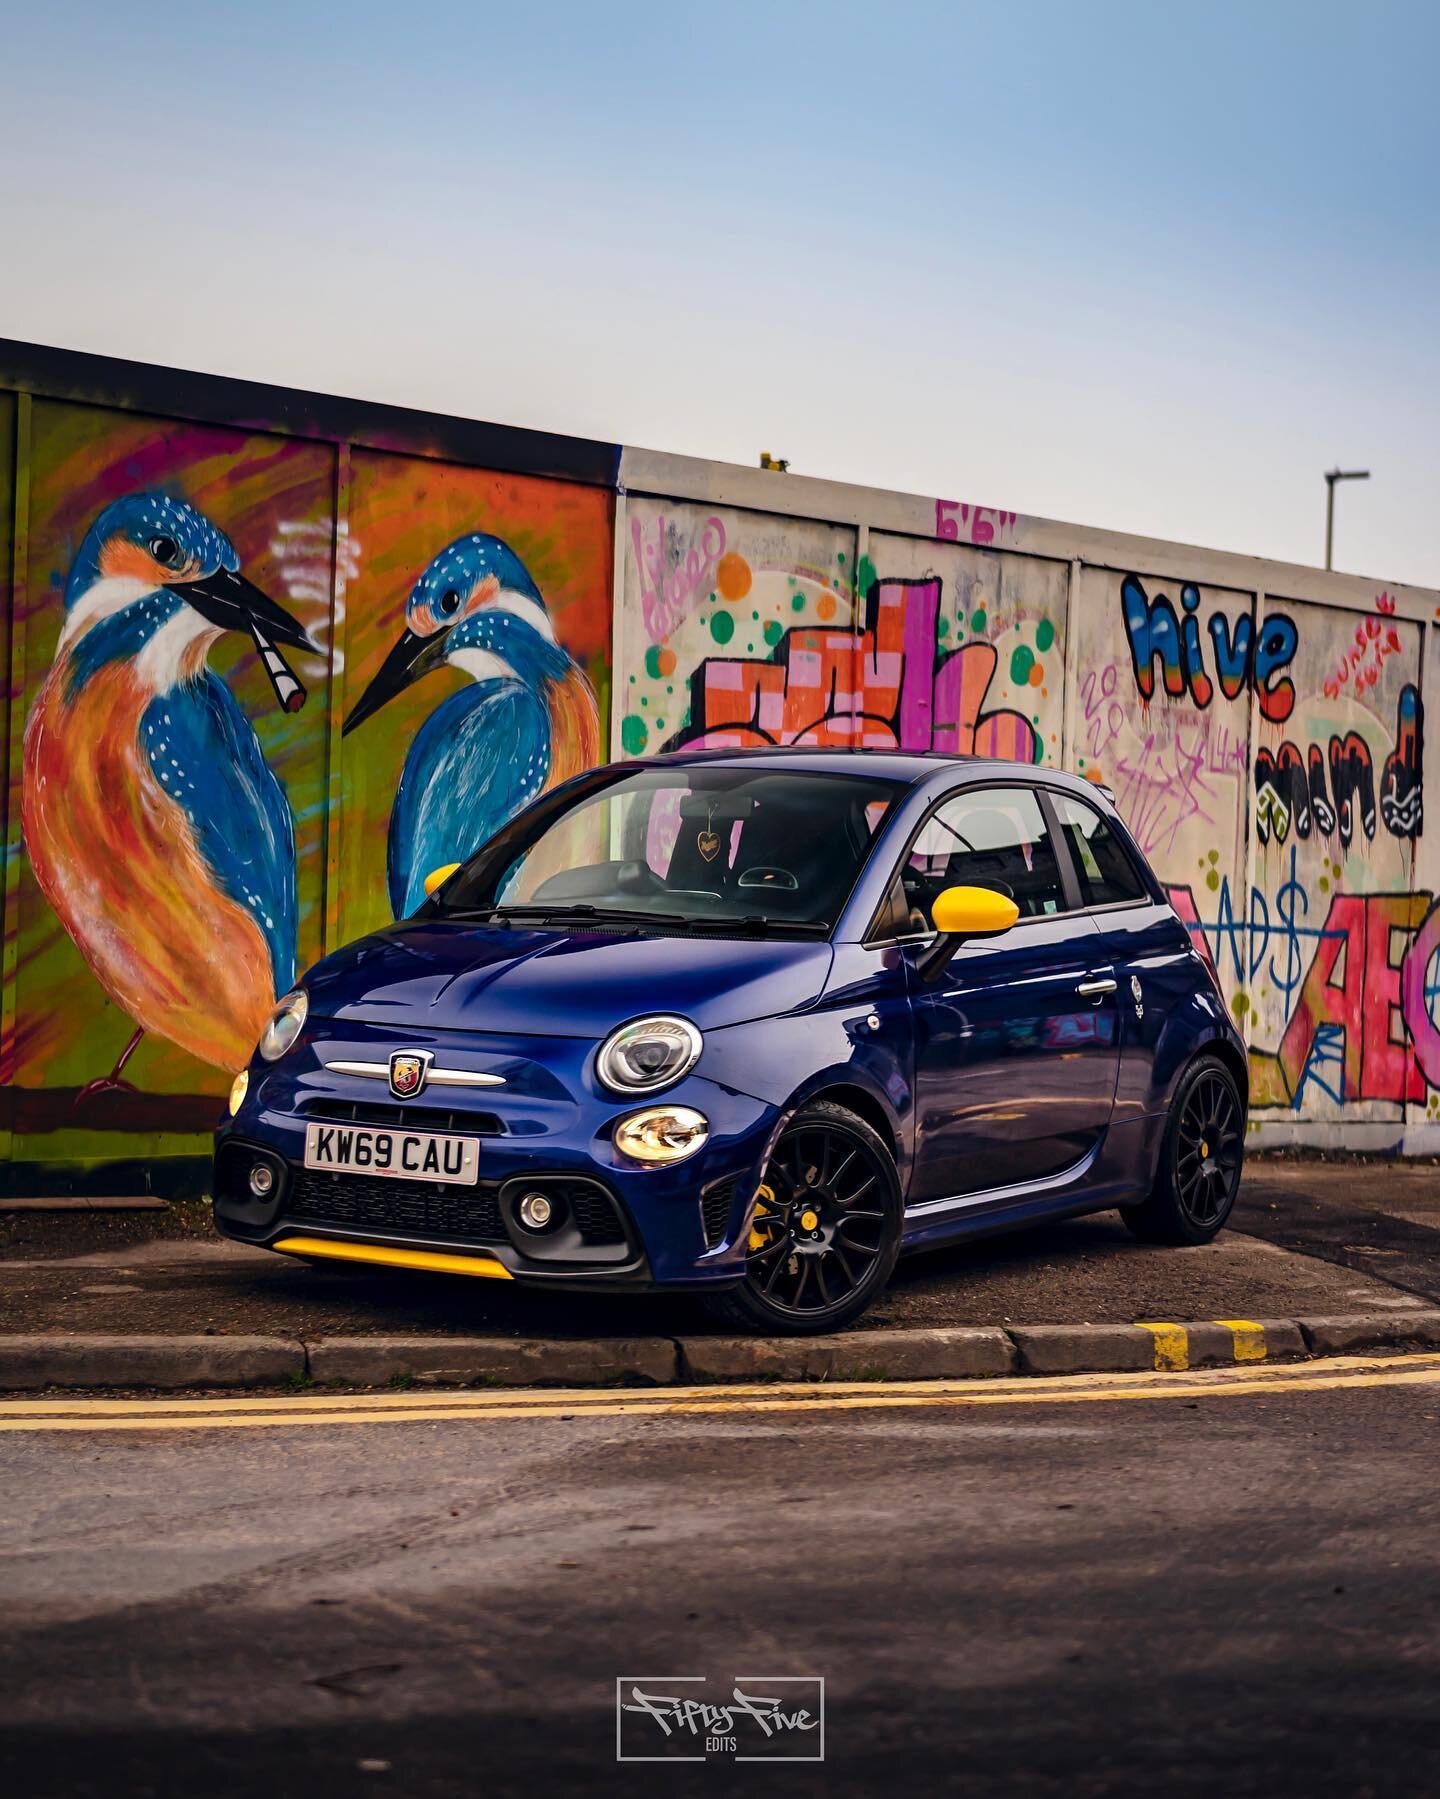 Loving the colours on @abarth_amy&rsquo;s 595 Pista💙💛

Stunning photo by @fiftyfifty_edits 

&mdash;&mdash;&mdash;&mdash;&mdash;&mdash;&mdash;&mdash;&mdash;&mdash;&mdash;&mdash;&mdash;&mdash;&mdash;&mdash;&mdash;

#abarth #abarth500 #abarthaddict #